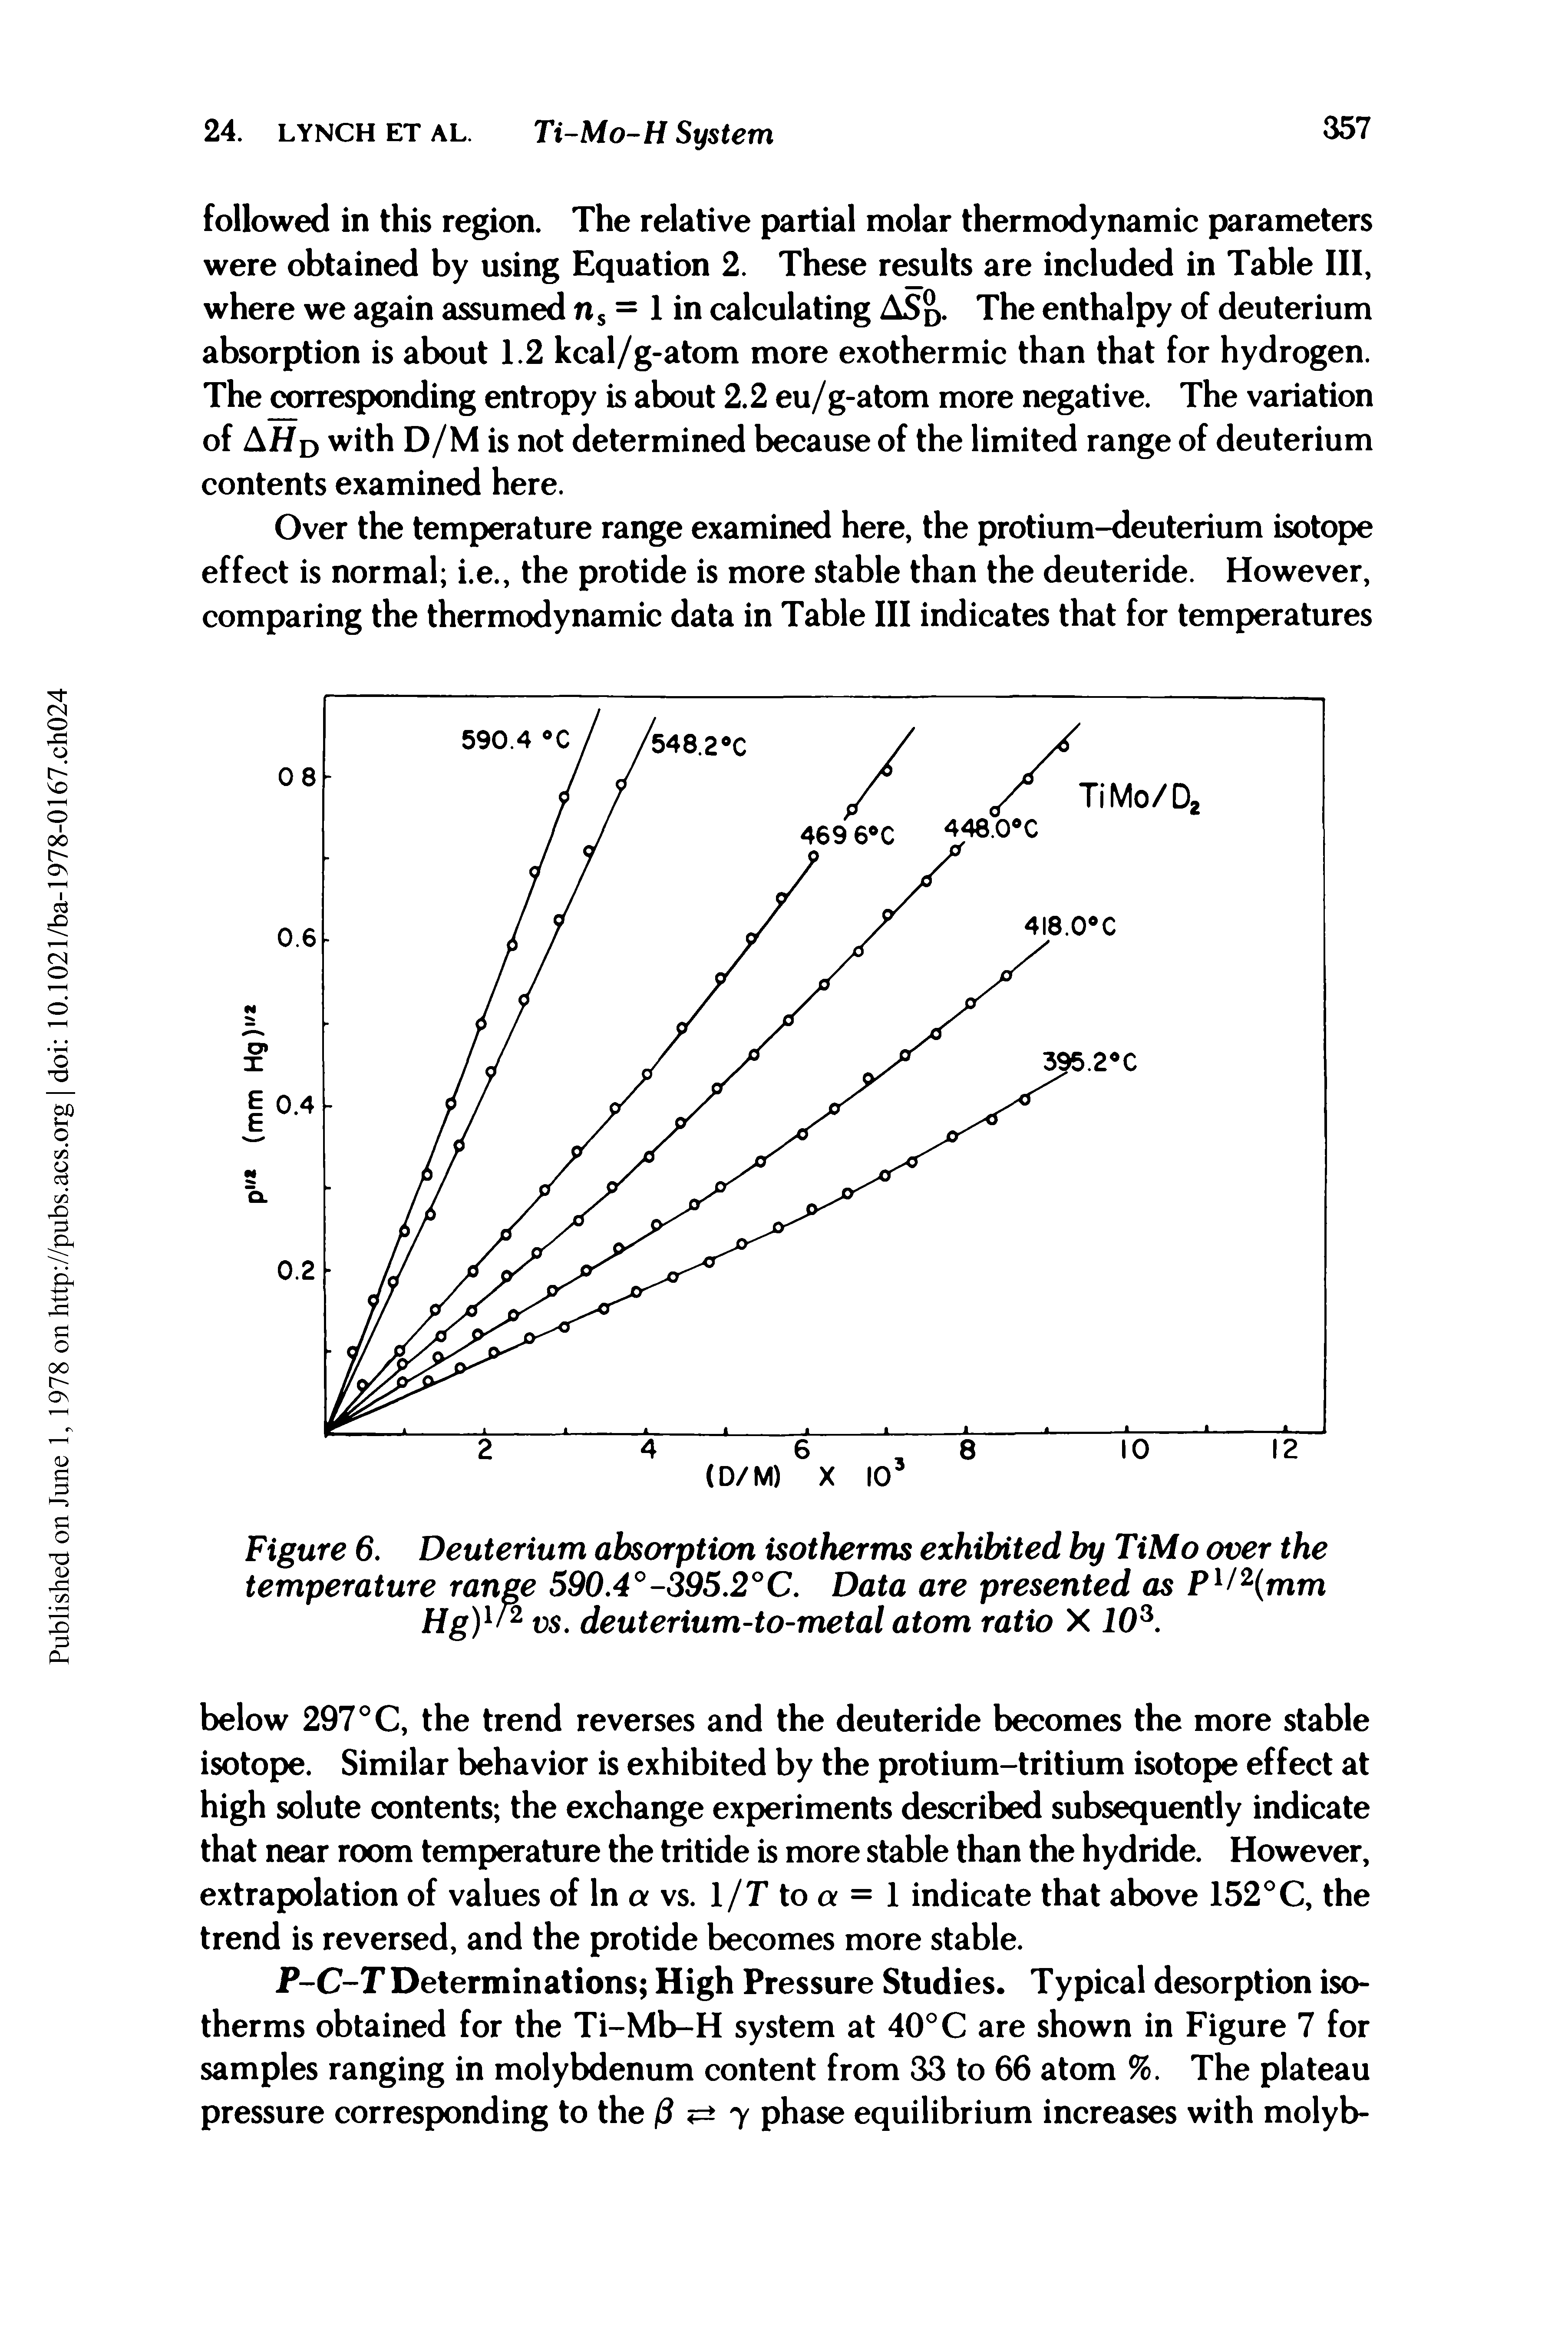 Figure 6. Deuterium absorption isotherms exhibited by TiMo over the temperature range 590.4°-395.2°C. Data are presented as F1/2(mm Hg)1/2 vs. deuterium-to-metal atom ratio X I03.